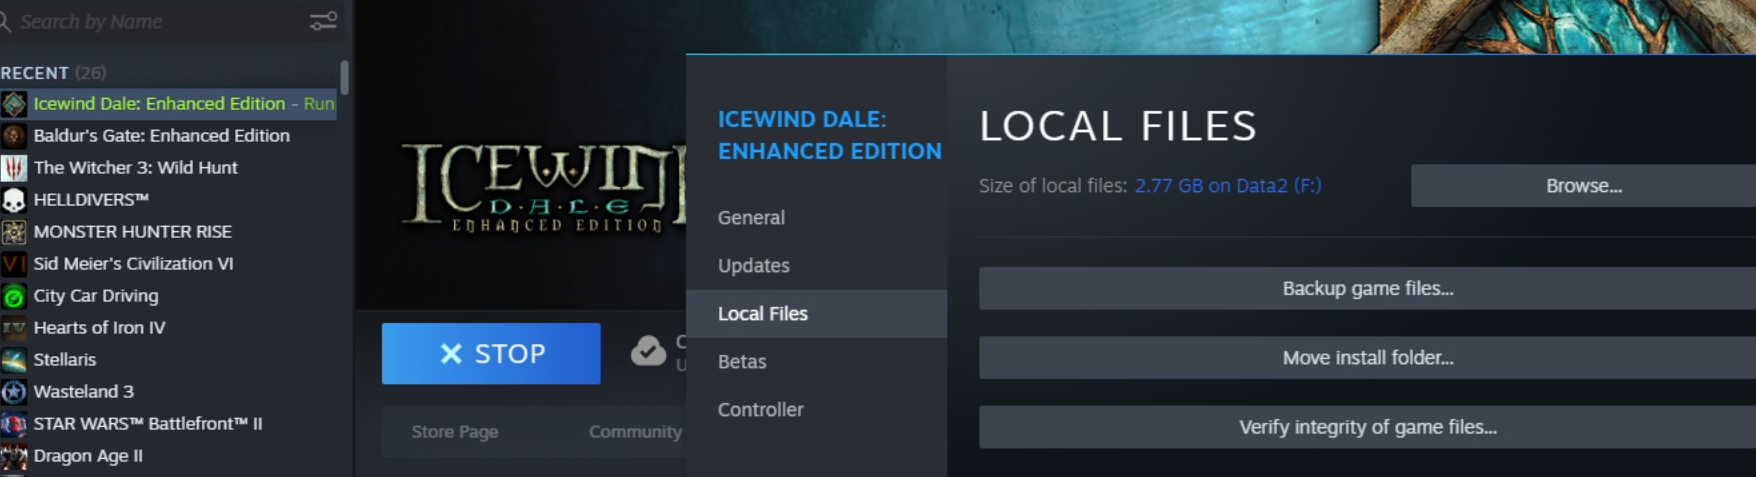 Icewind Dale: Enhanced Edition - AI Script for Icewind Dale EE Config - Installation - 3A28EEC